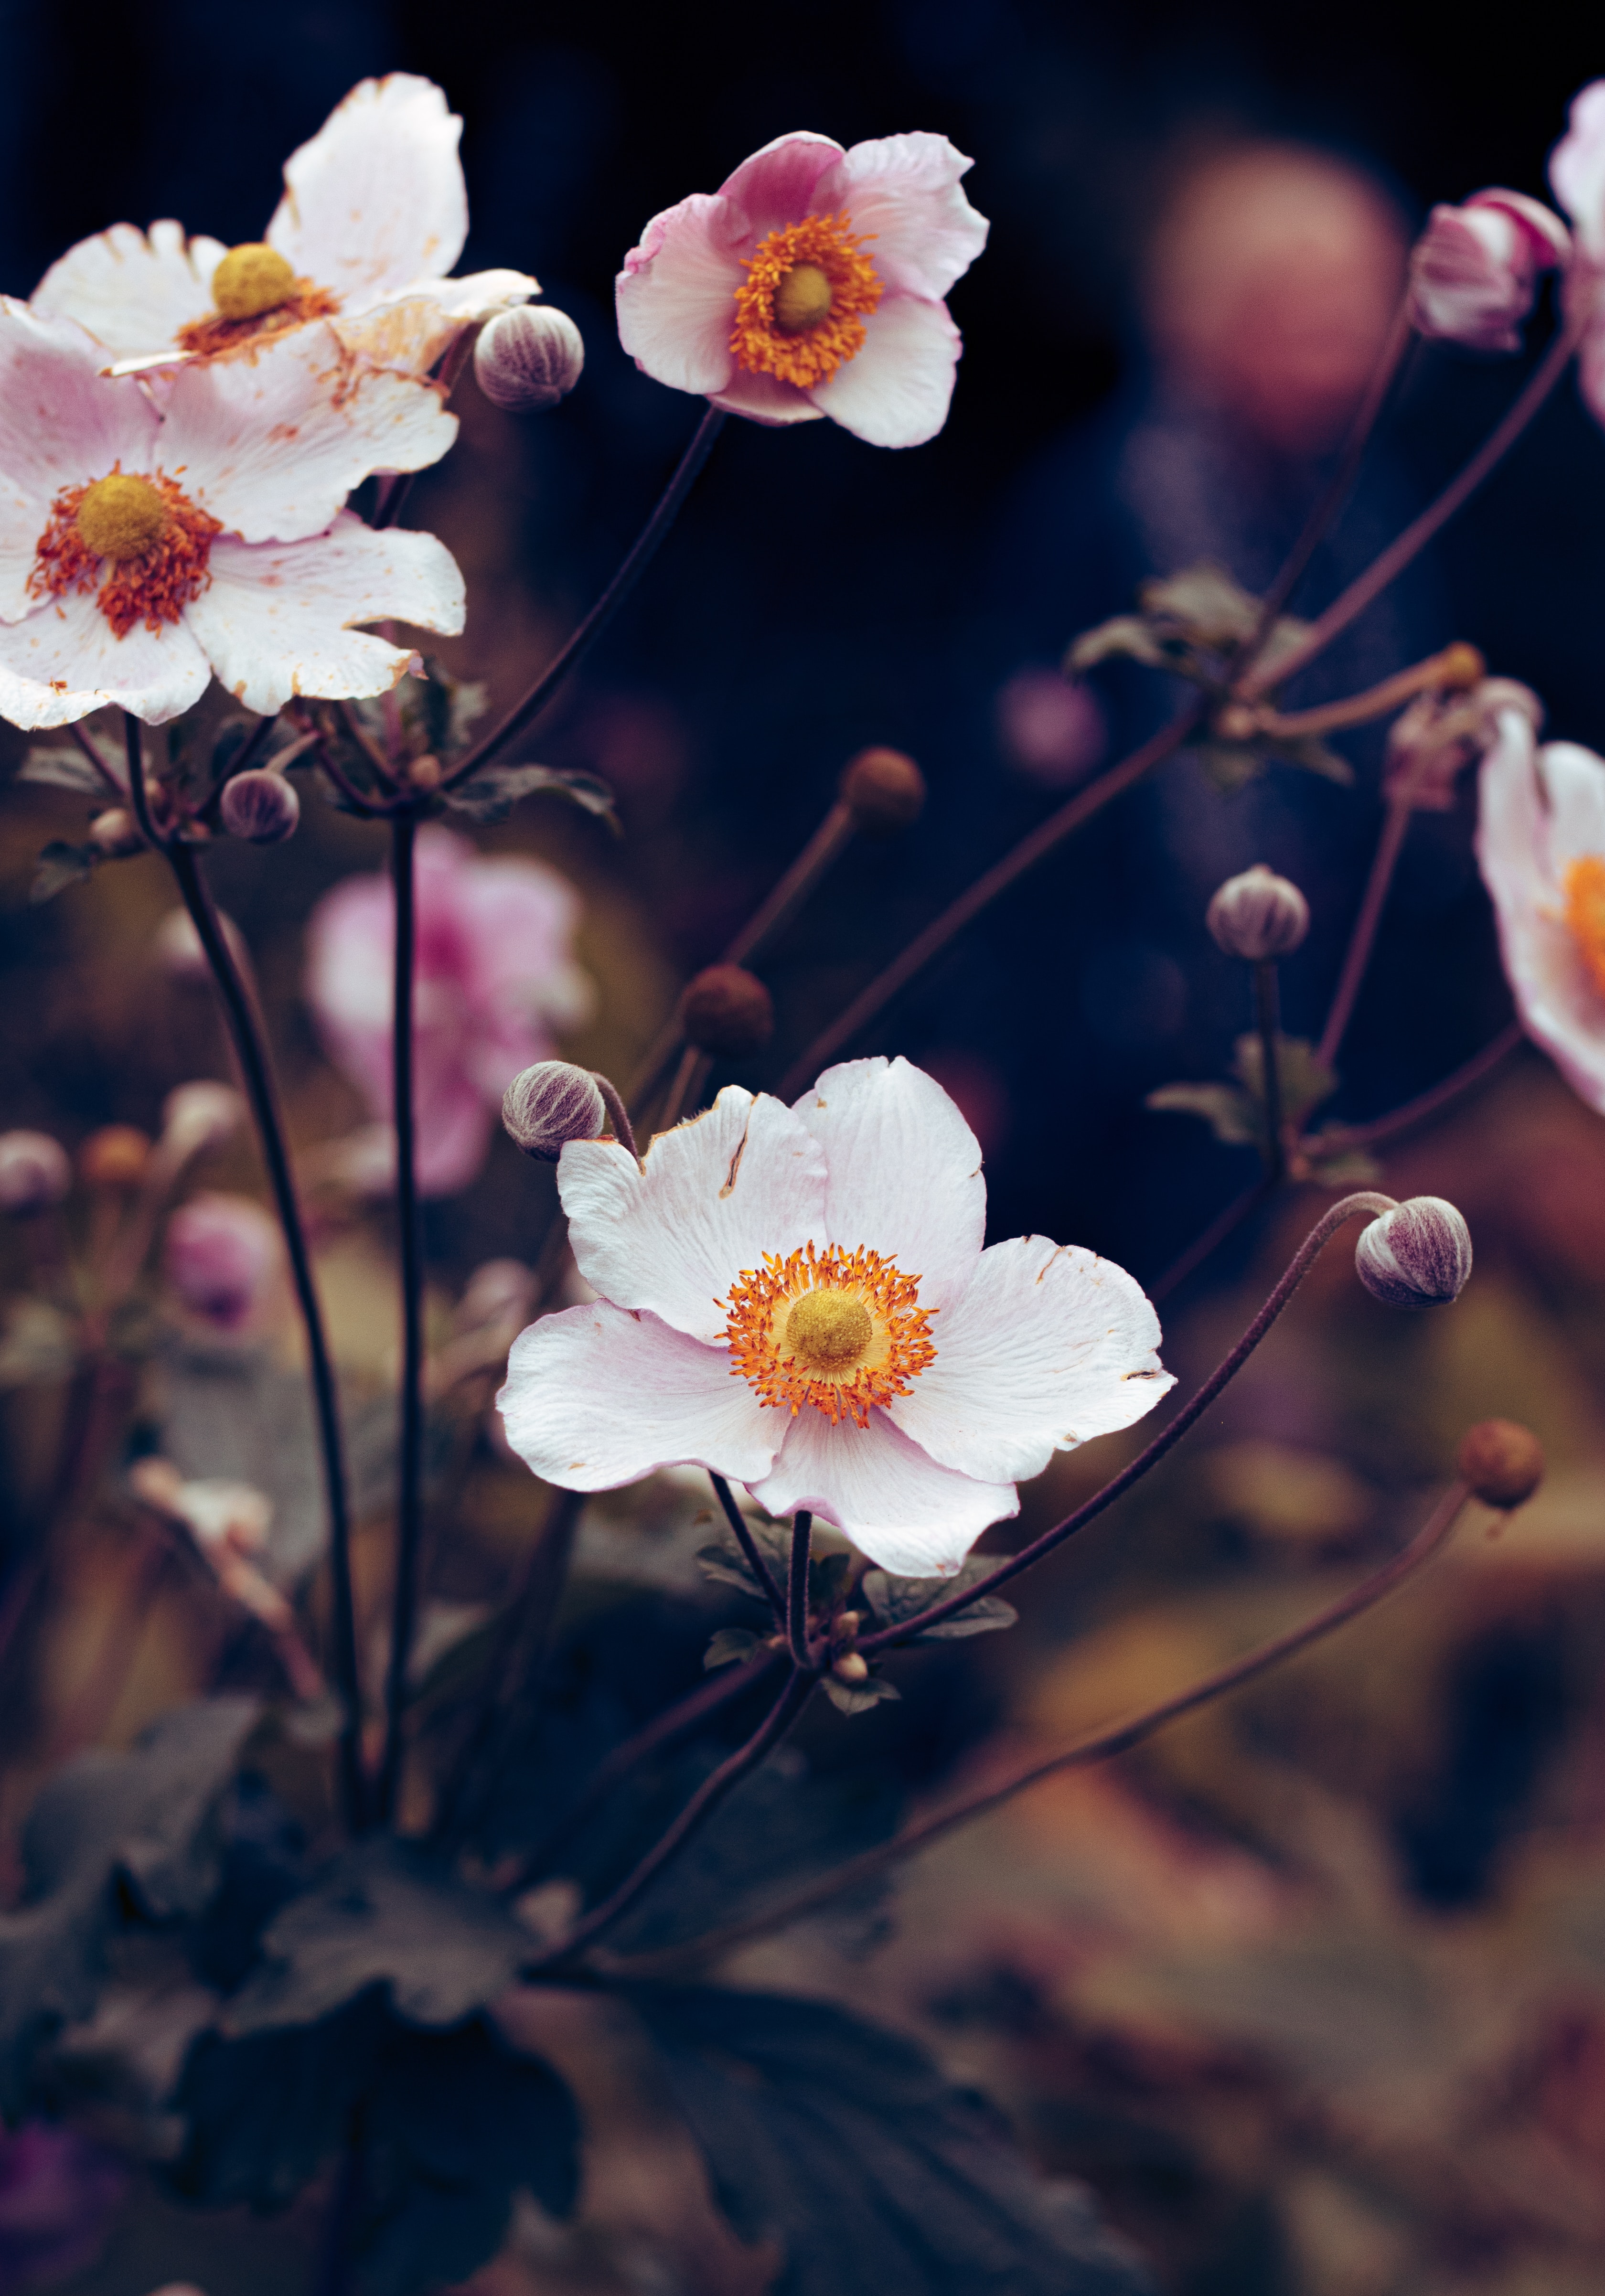 80117 download wallpaper flowers, white, flower, plant, bloom, flowering, anemone screensavers and pictures for free